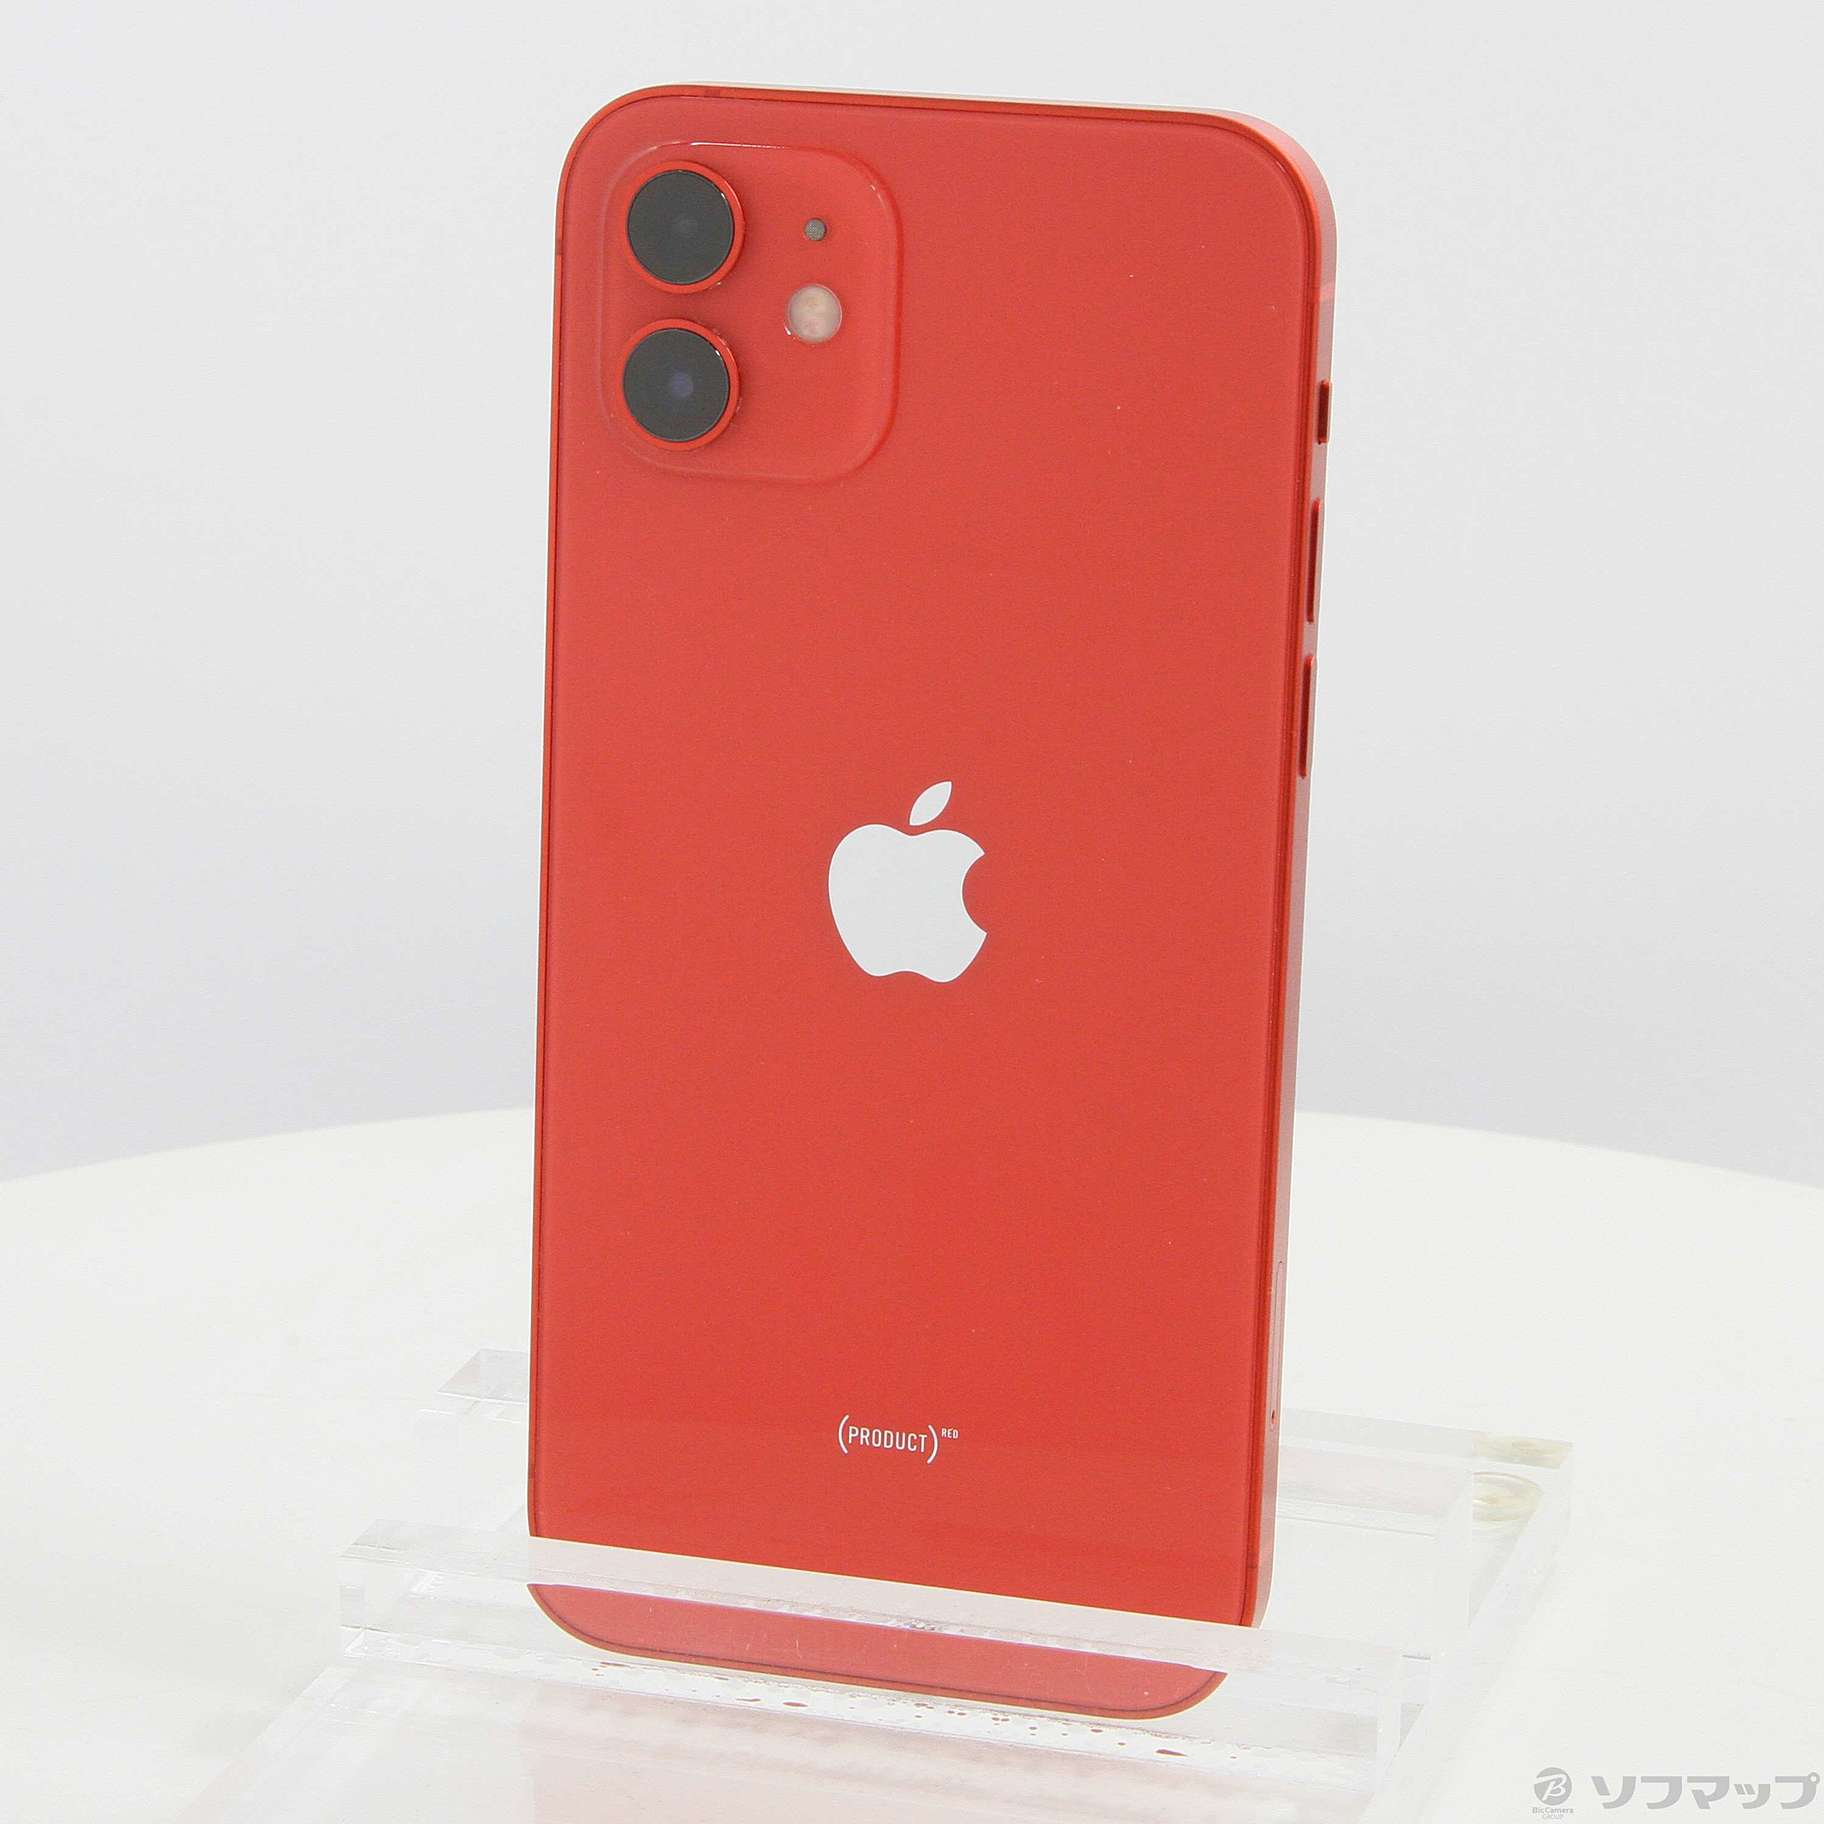 Apple iPhone12 128GB PRODUCT RED MGHW3J…